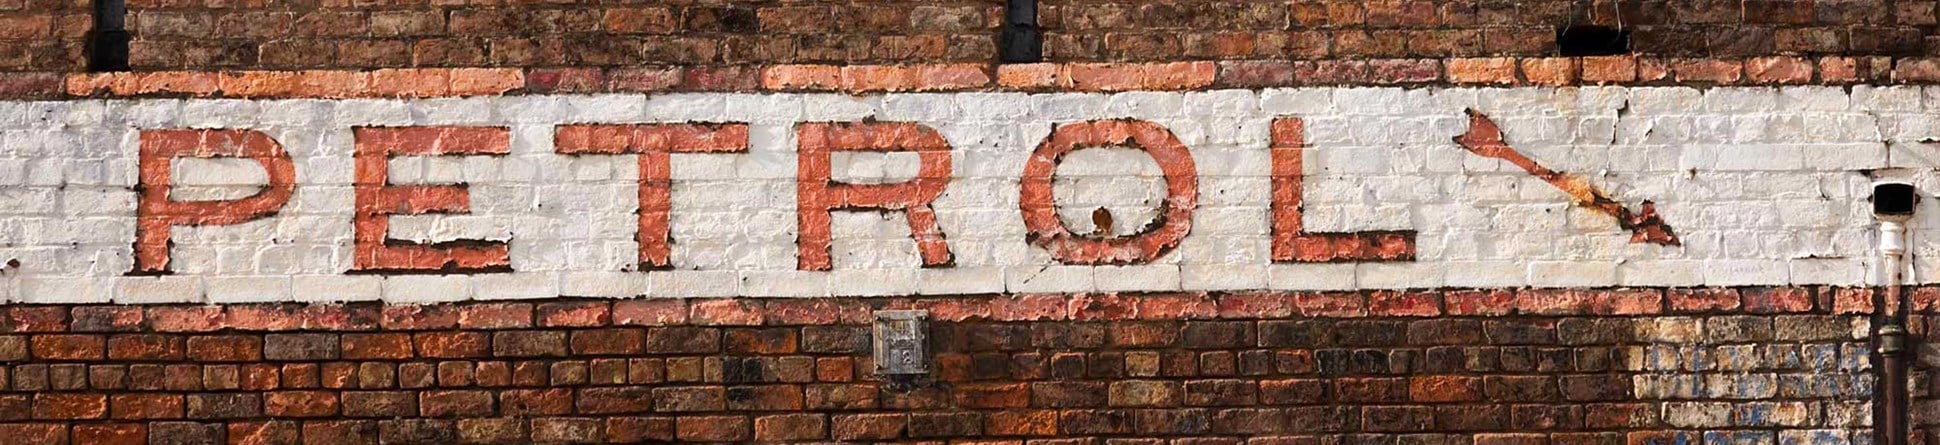 Image of a white and red sign reading 'petrol' on the front of a brick building.